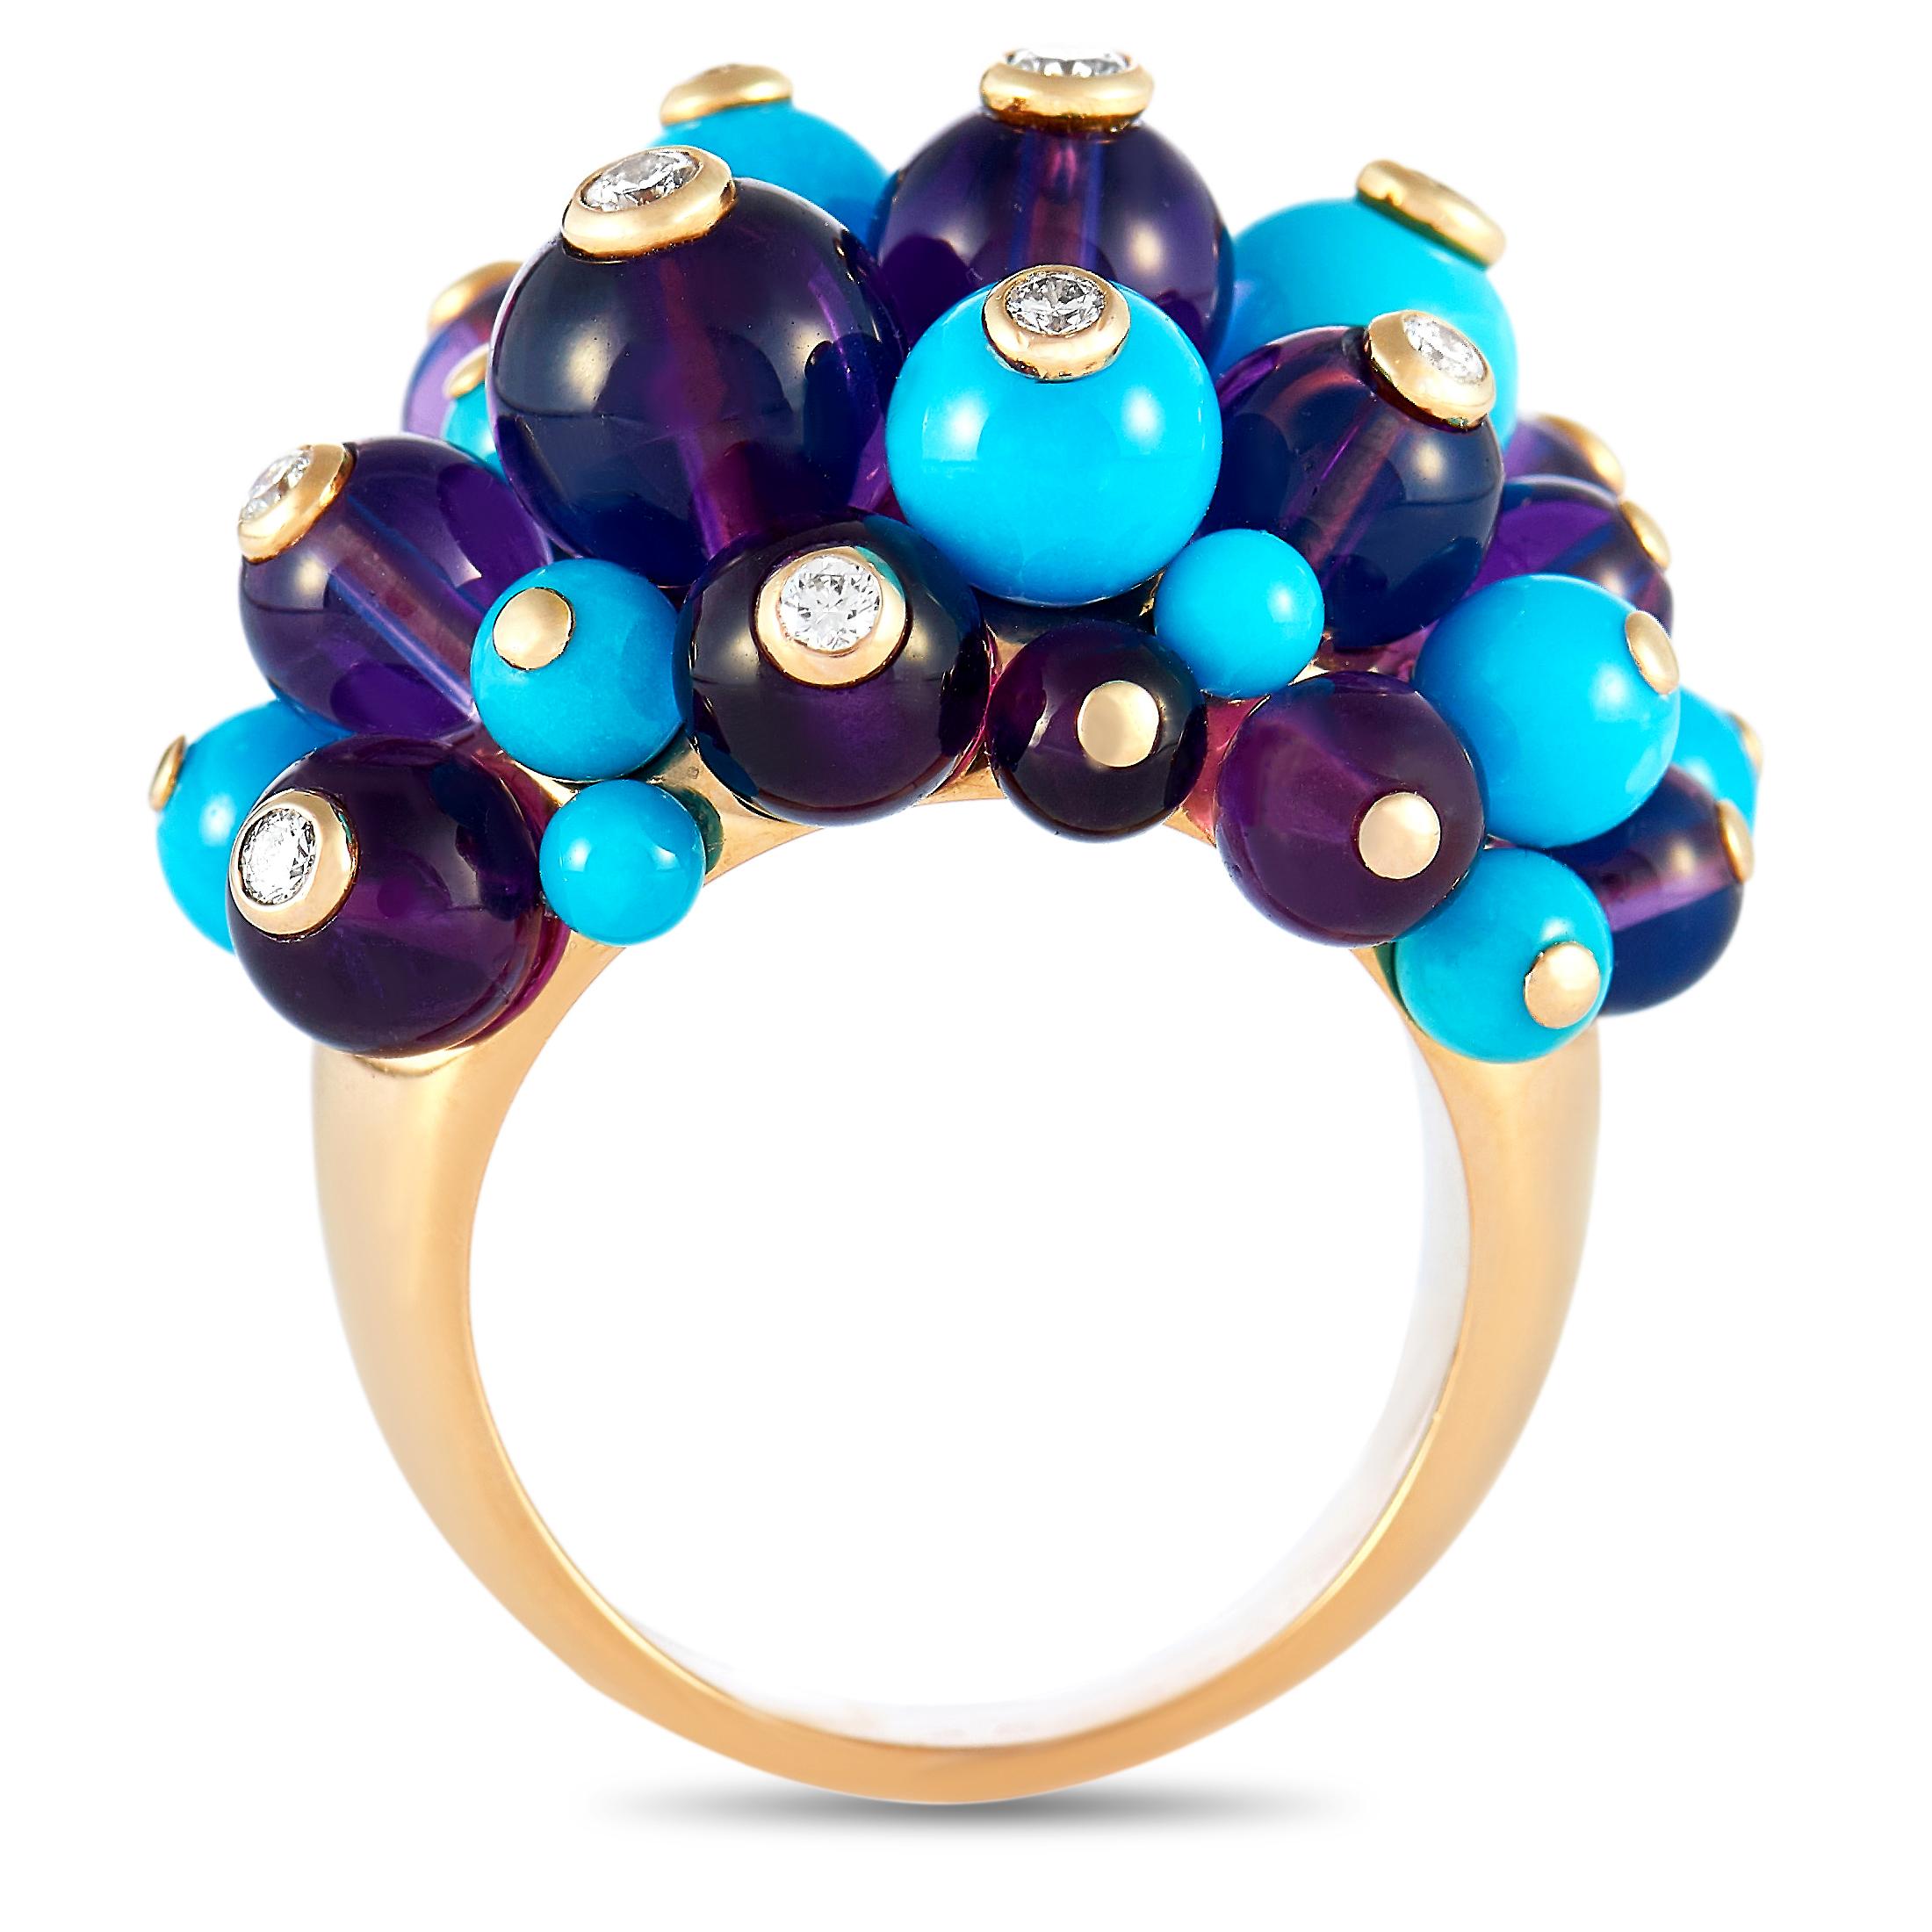 The Cartier “Delices” ring is made of 18K yellow gold and weighs 35.8 grams. It boasts band thickness of 4 mm and top height of 15 mm, while top dimensions measure 30 by 25 mm. The ring is embellished with turquoises, amethysts, and a total of